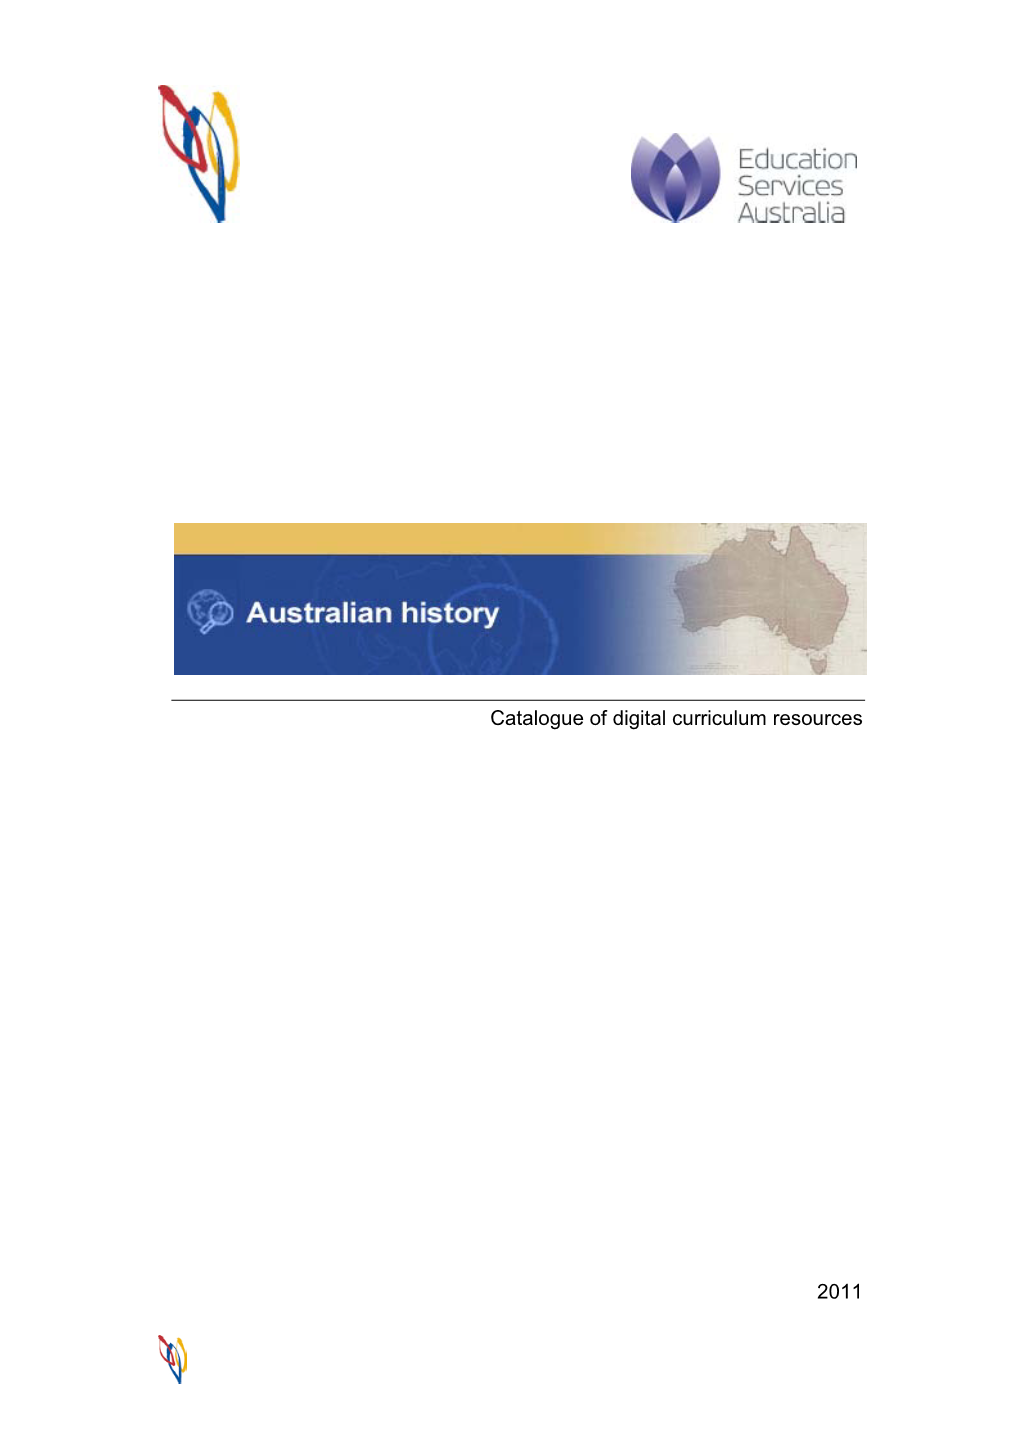 Australian History Digital Curriculum Resources Made Available by the Learning Federation (TLF) to All Schools in Australia and New Zealand